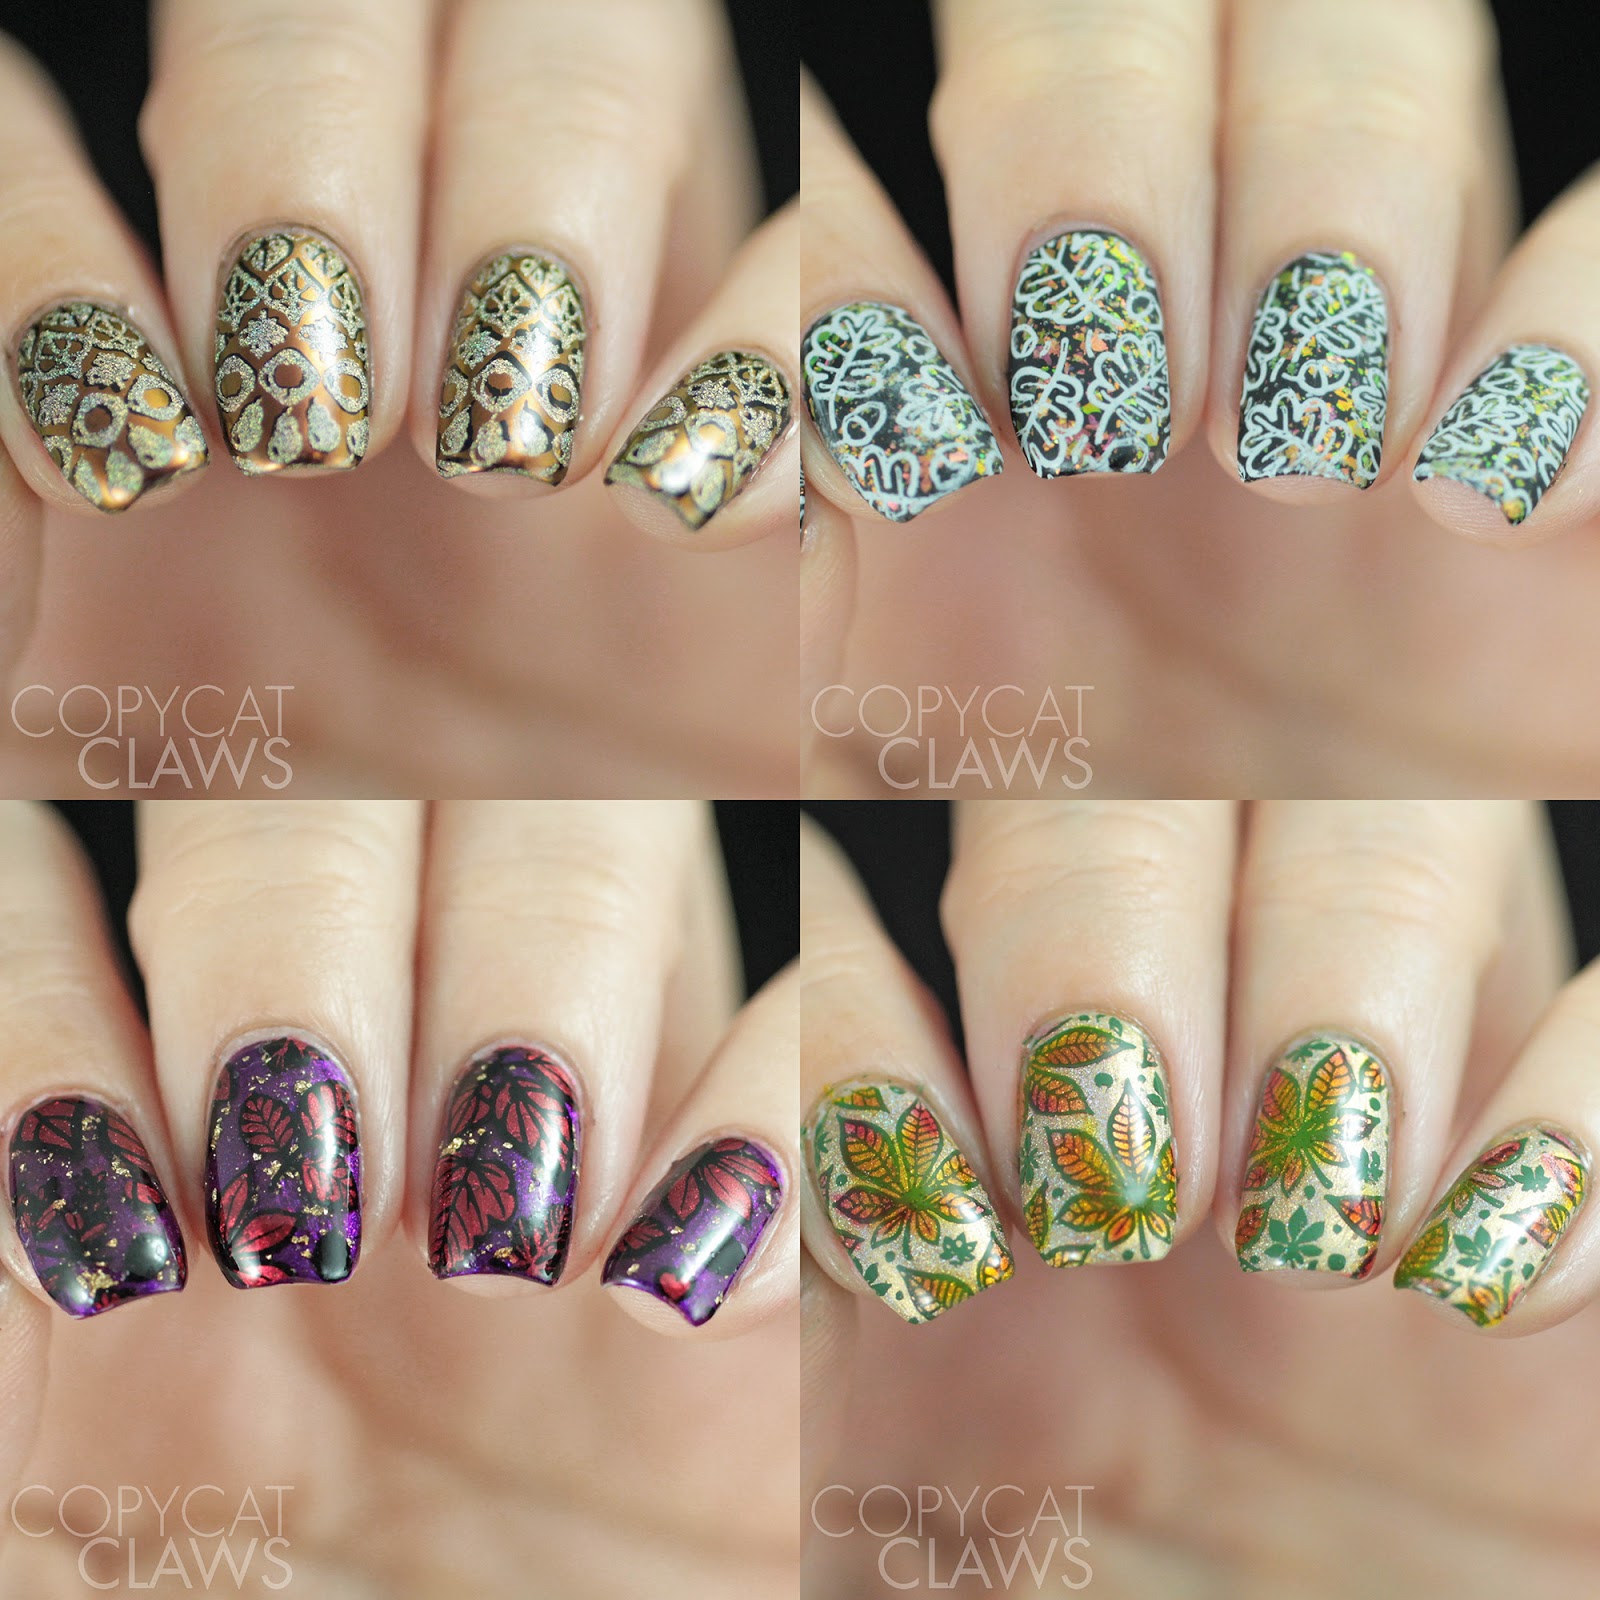 Copycat Claws: Whats Up Nails A011 and B021 Fall Stamping Plates